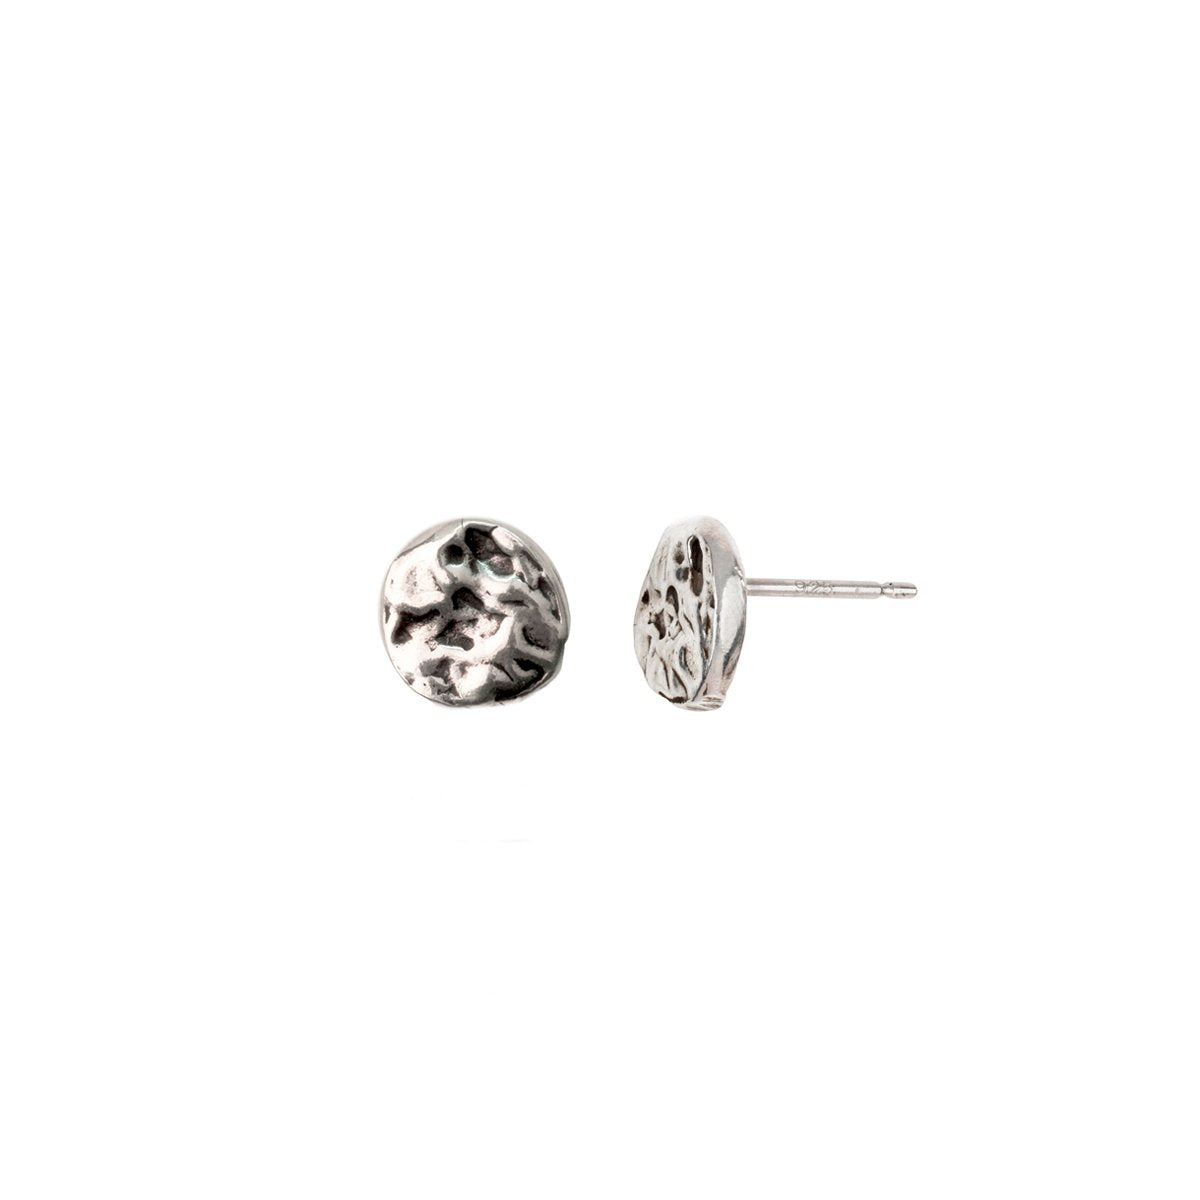 A set of Extra Small sterling silver Solid Circle Studs.